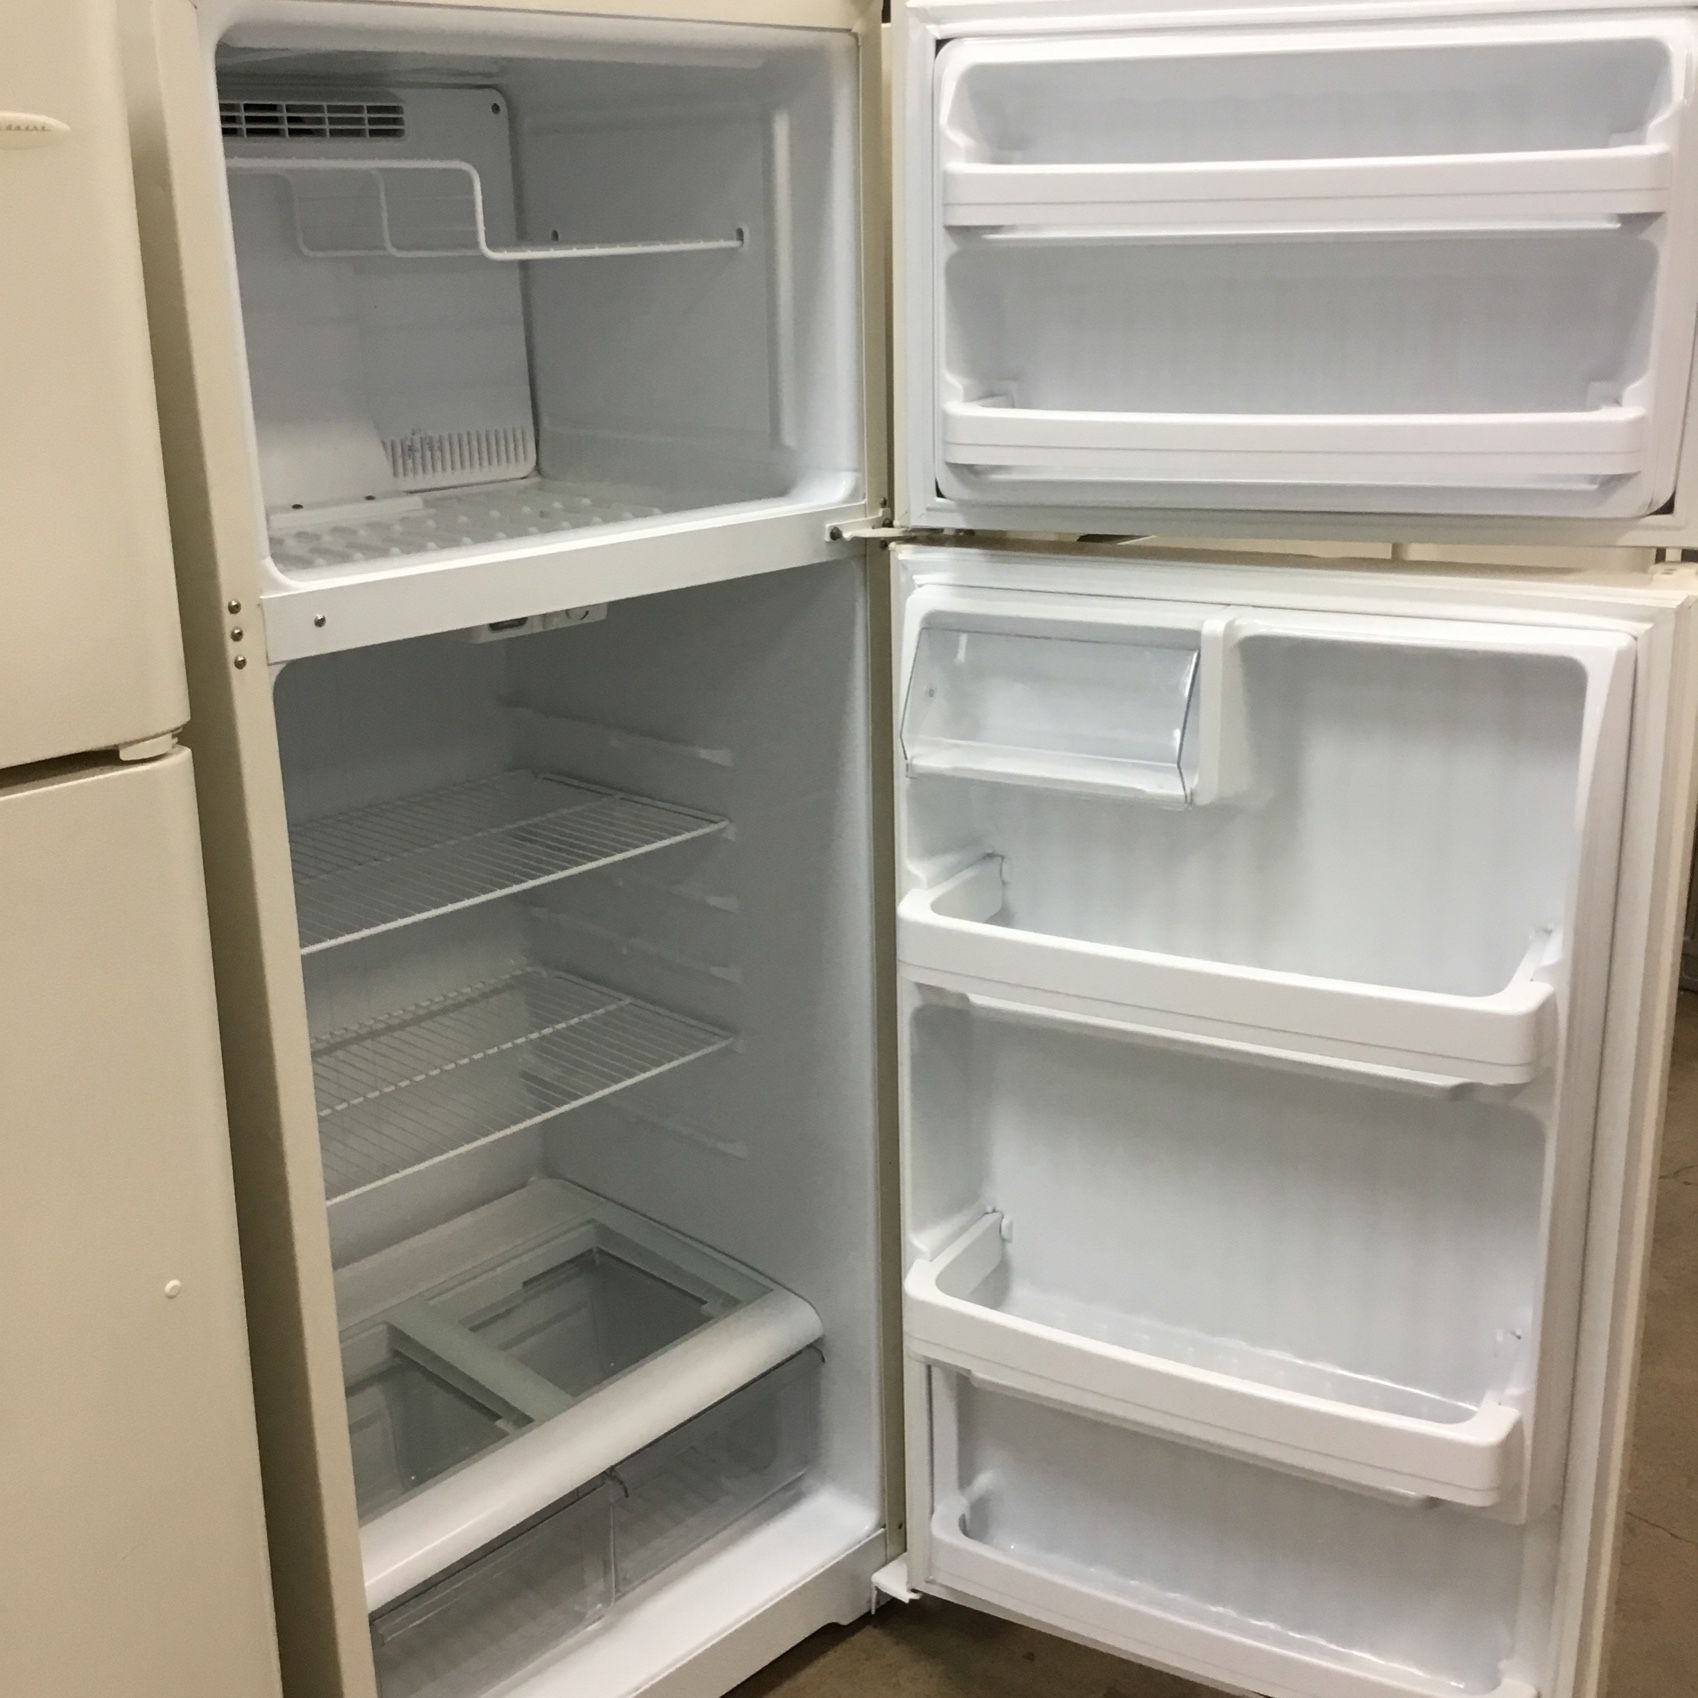 GE Tan Top Over Bottom Refrigerator for Sale in Indianapolis, IN - OfferUp